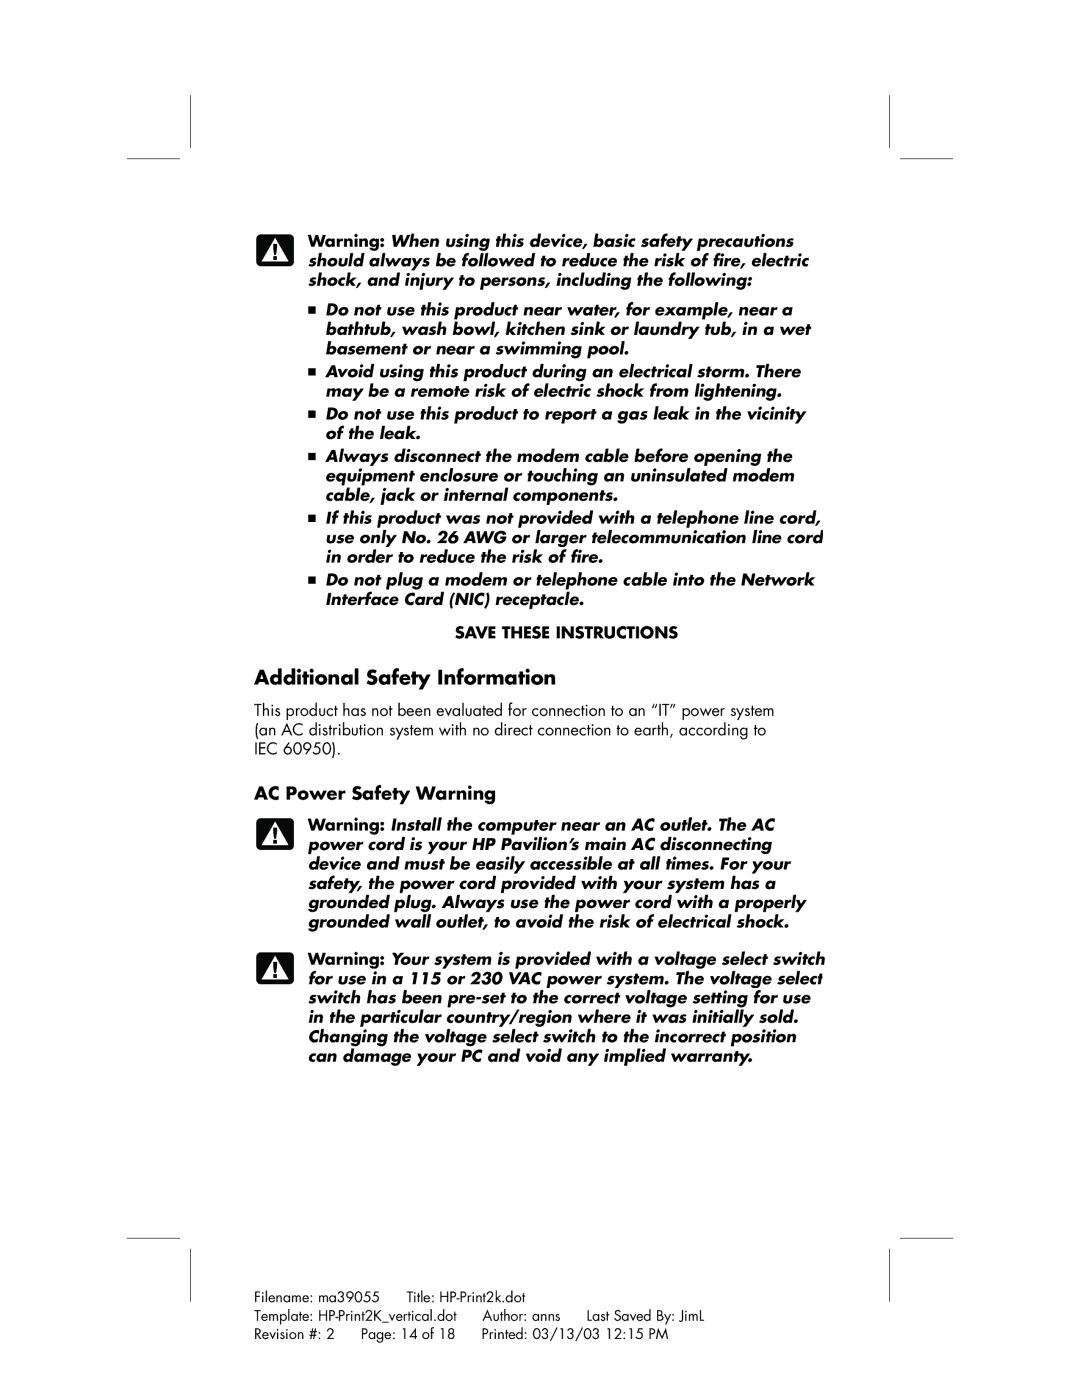 HP a210a (ap), a220a (ap) manual Additional Safety Information, AC Power Safety Warning 